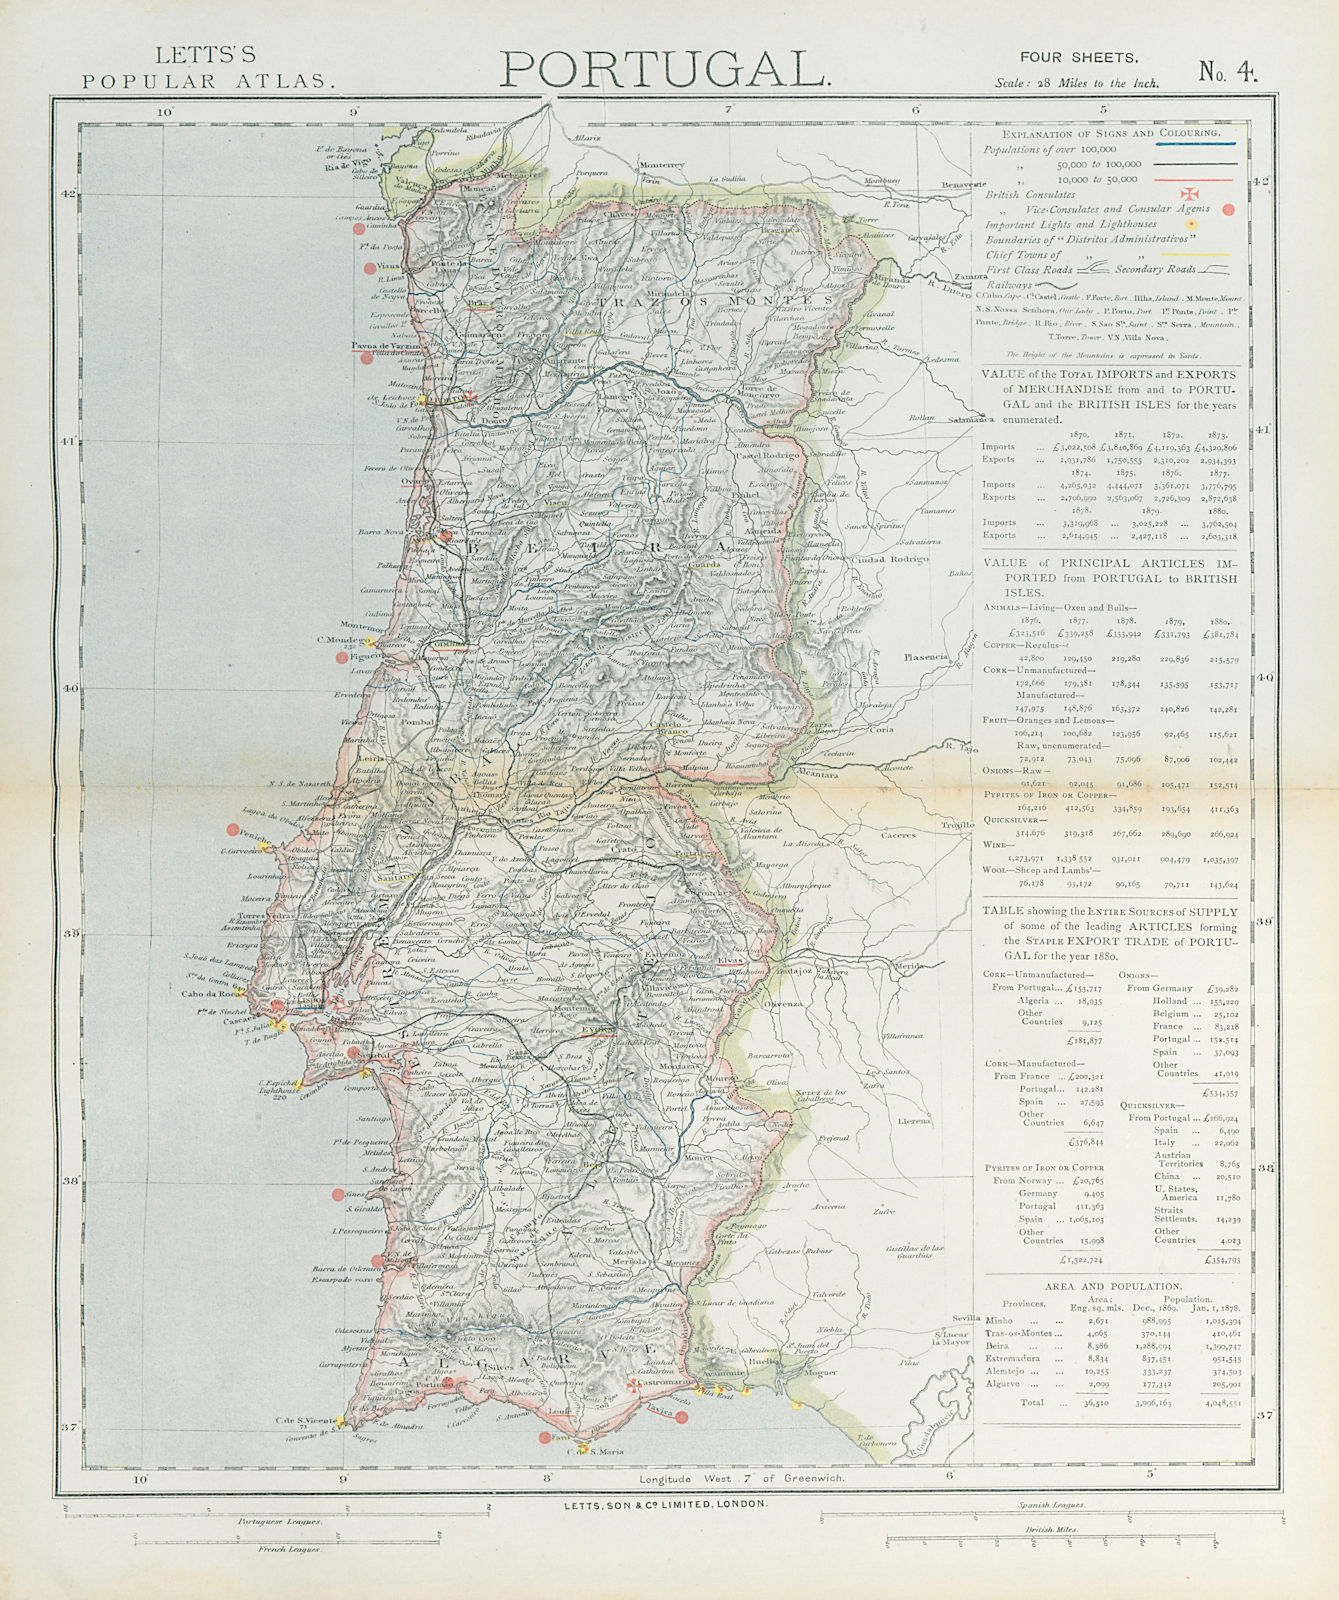 Associate Product PORTUGAL. Railways Lighthouses British Consuls exports to UK. LETTS 1883 map